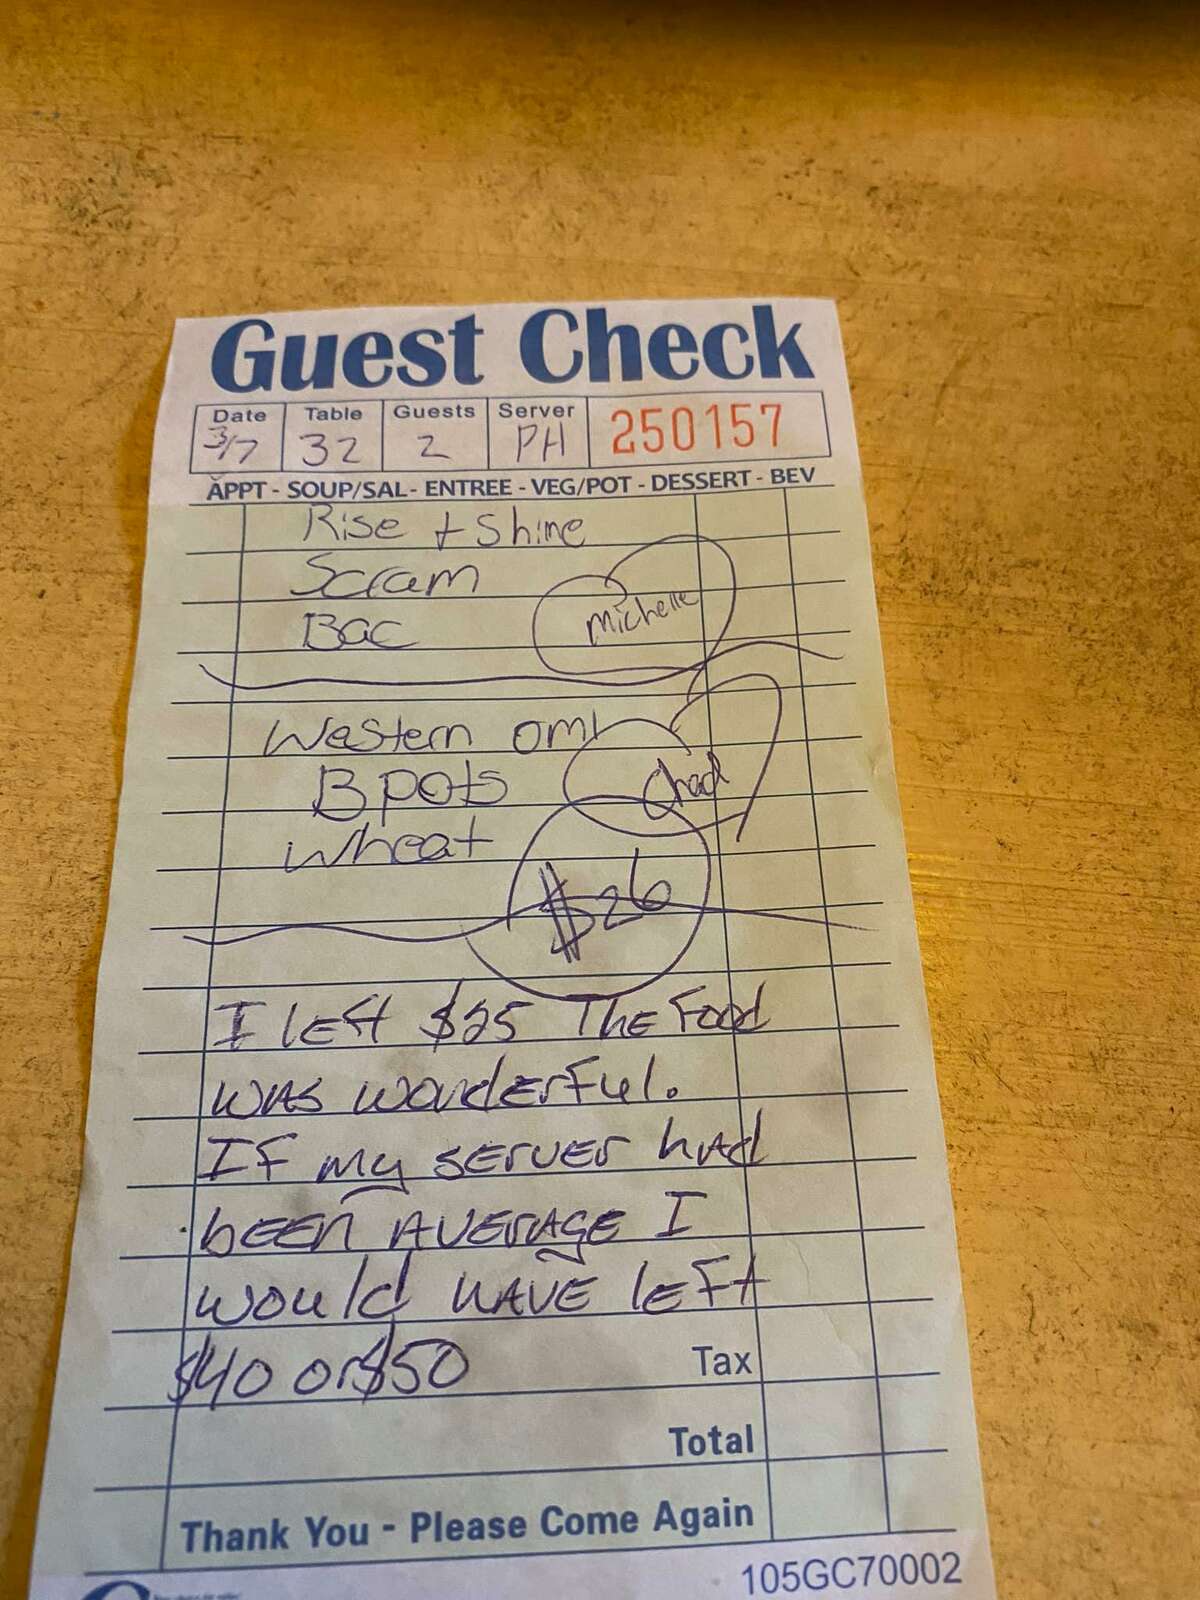 San Antonio is rallying around Comfort Café after the pay-what-you-can restaurant posted an example of the "rough" weekend staff experienced.